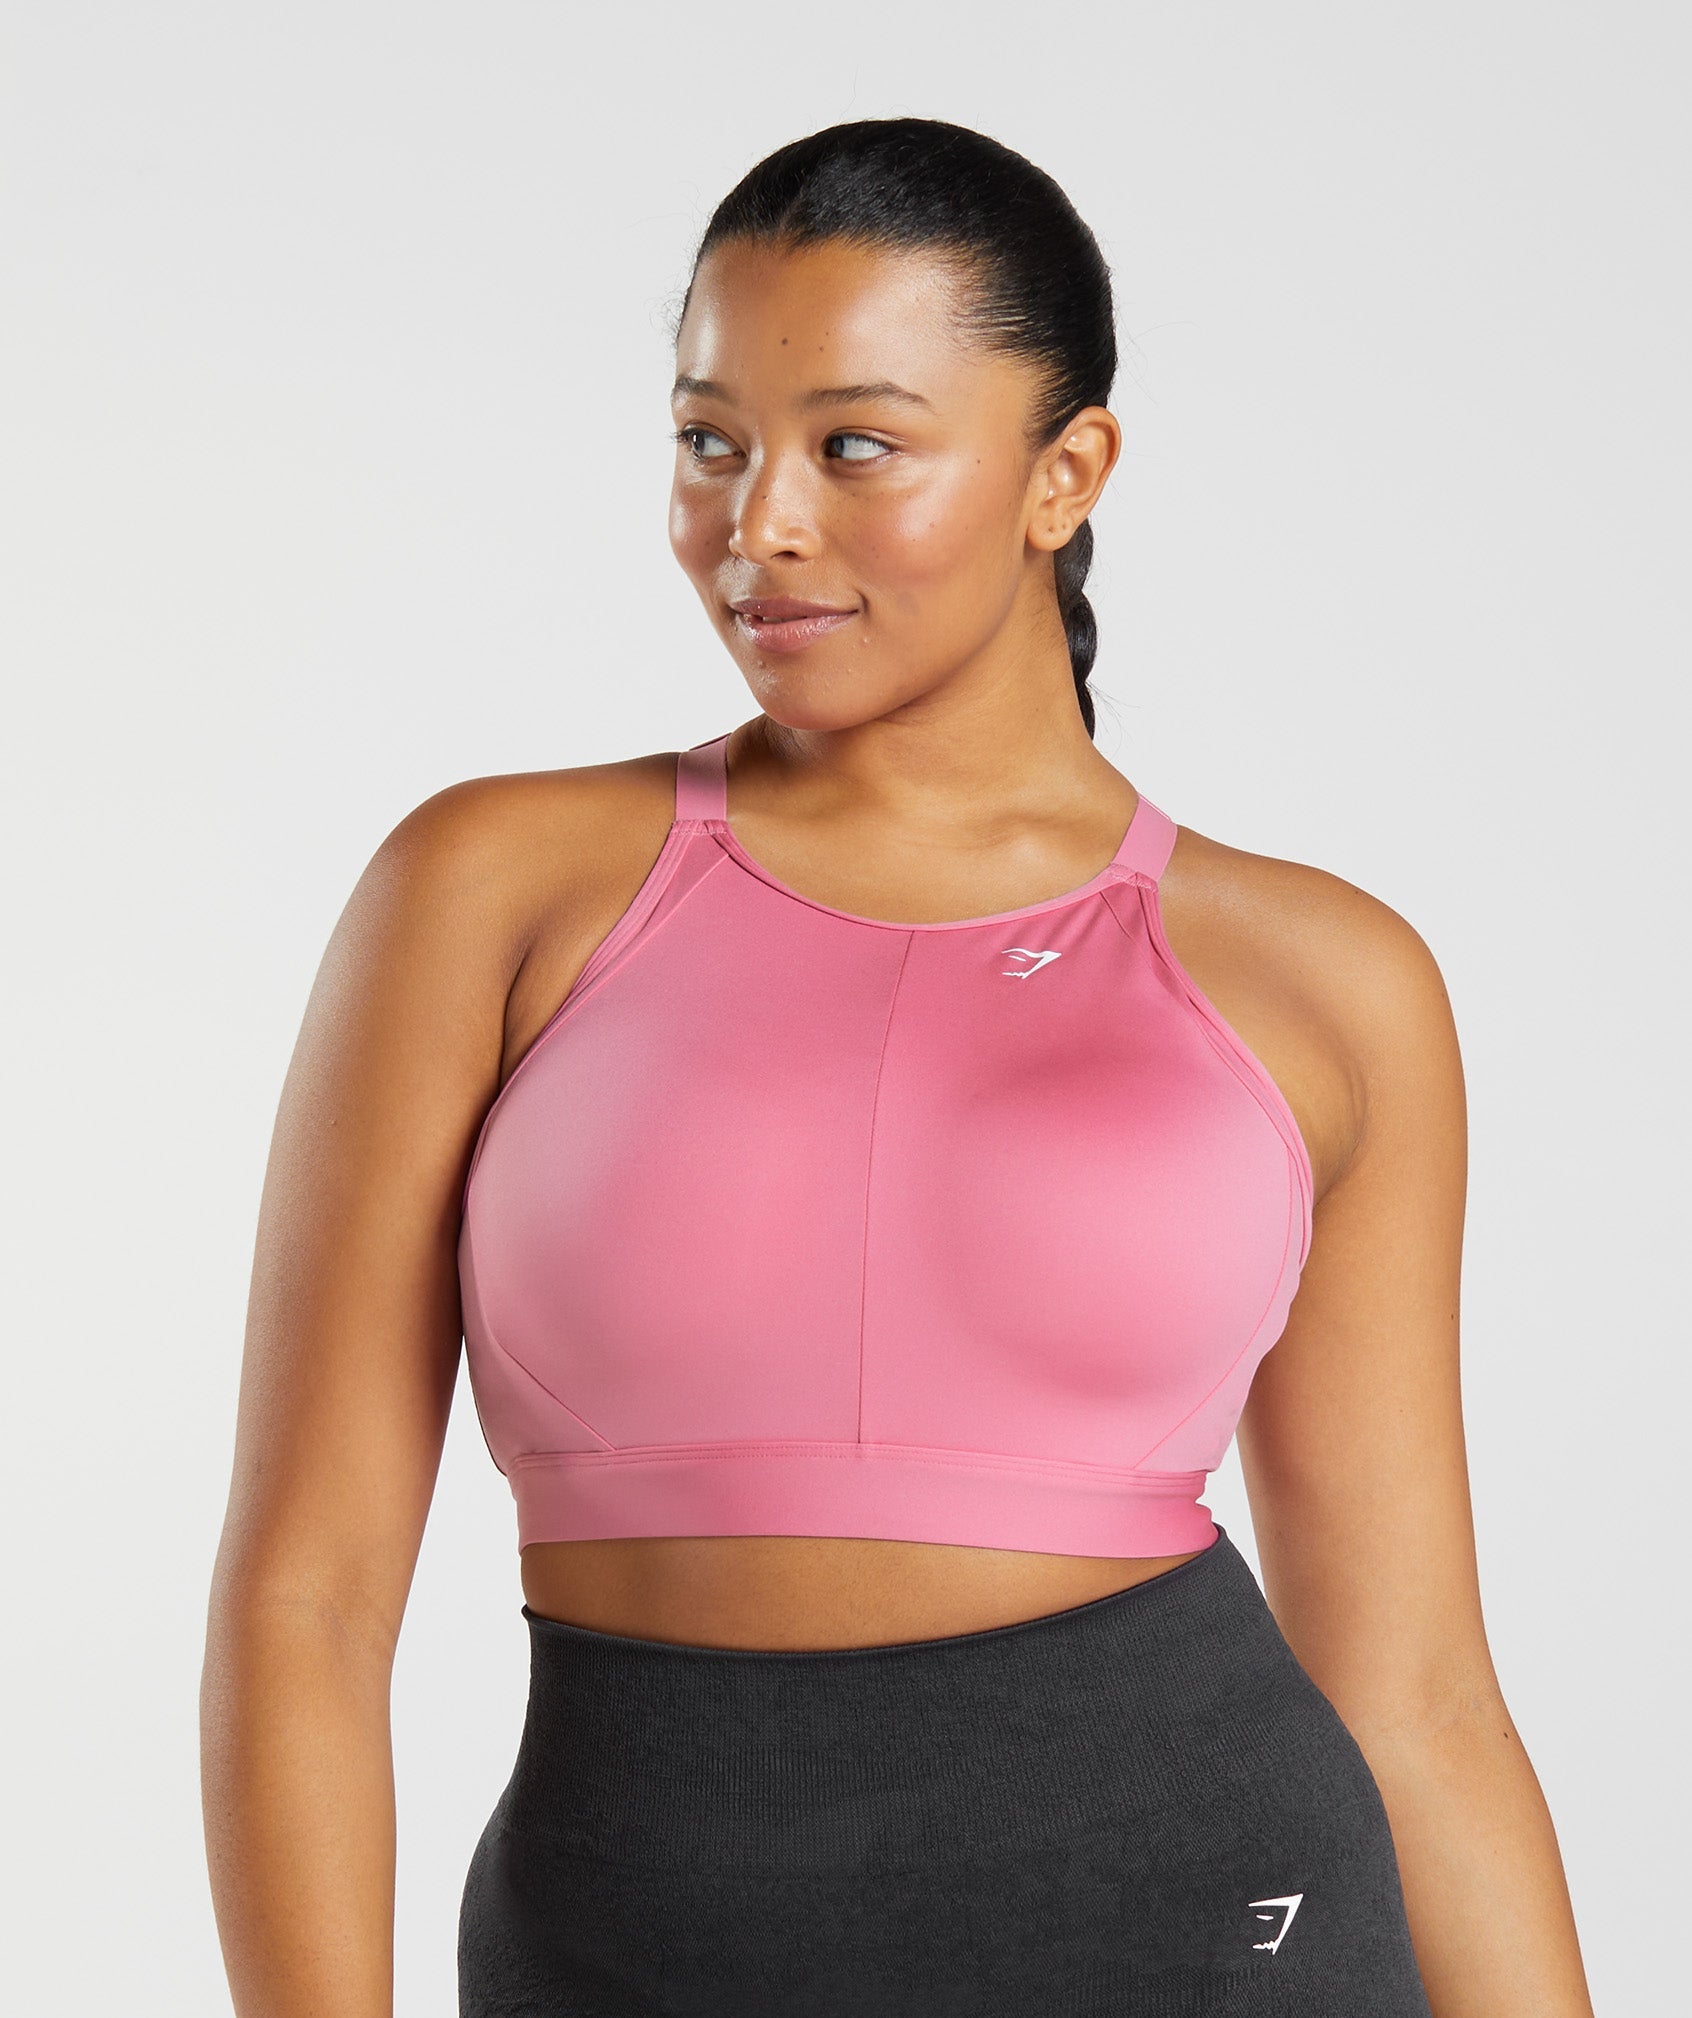  Lfzhjzc Large Size Fixed Sports Bras for Women